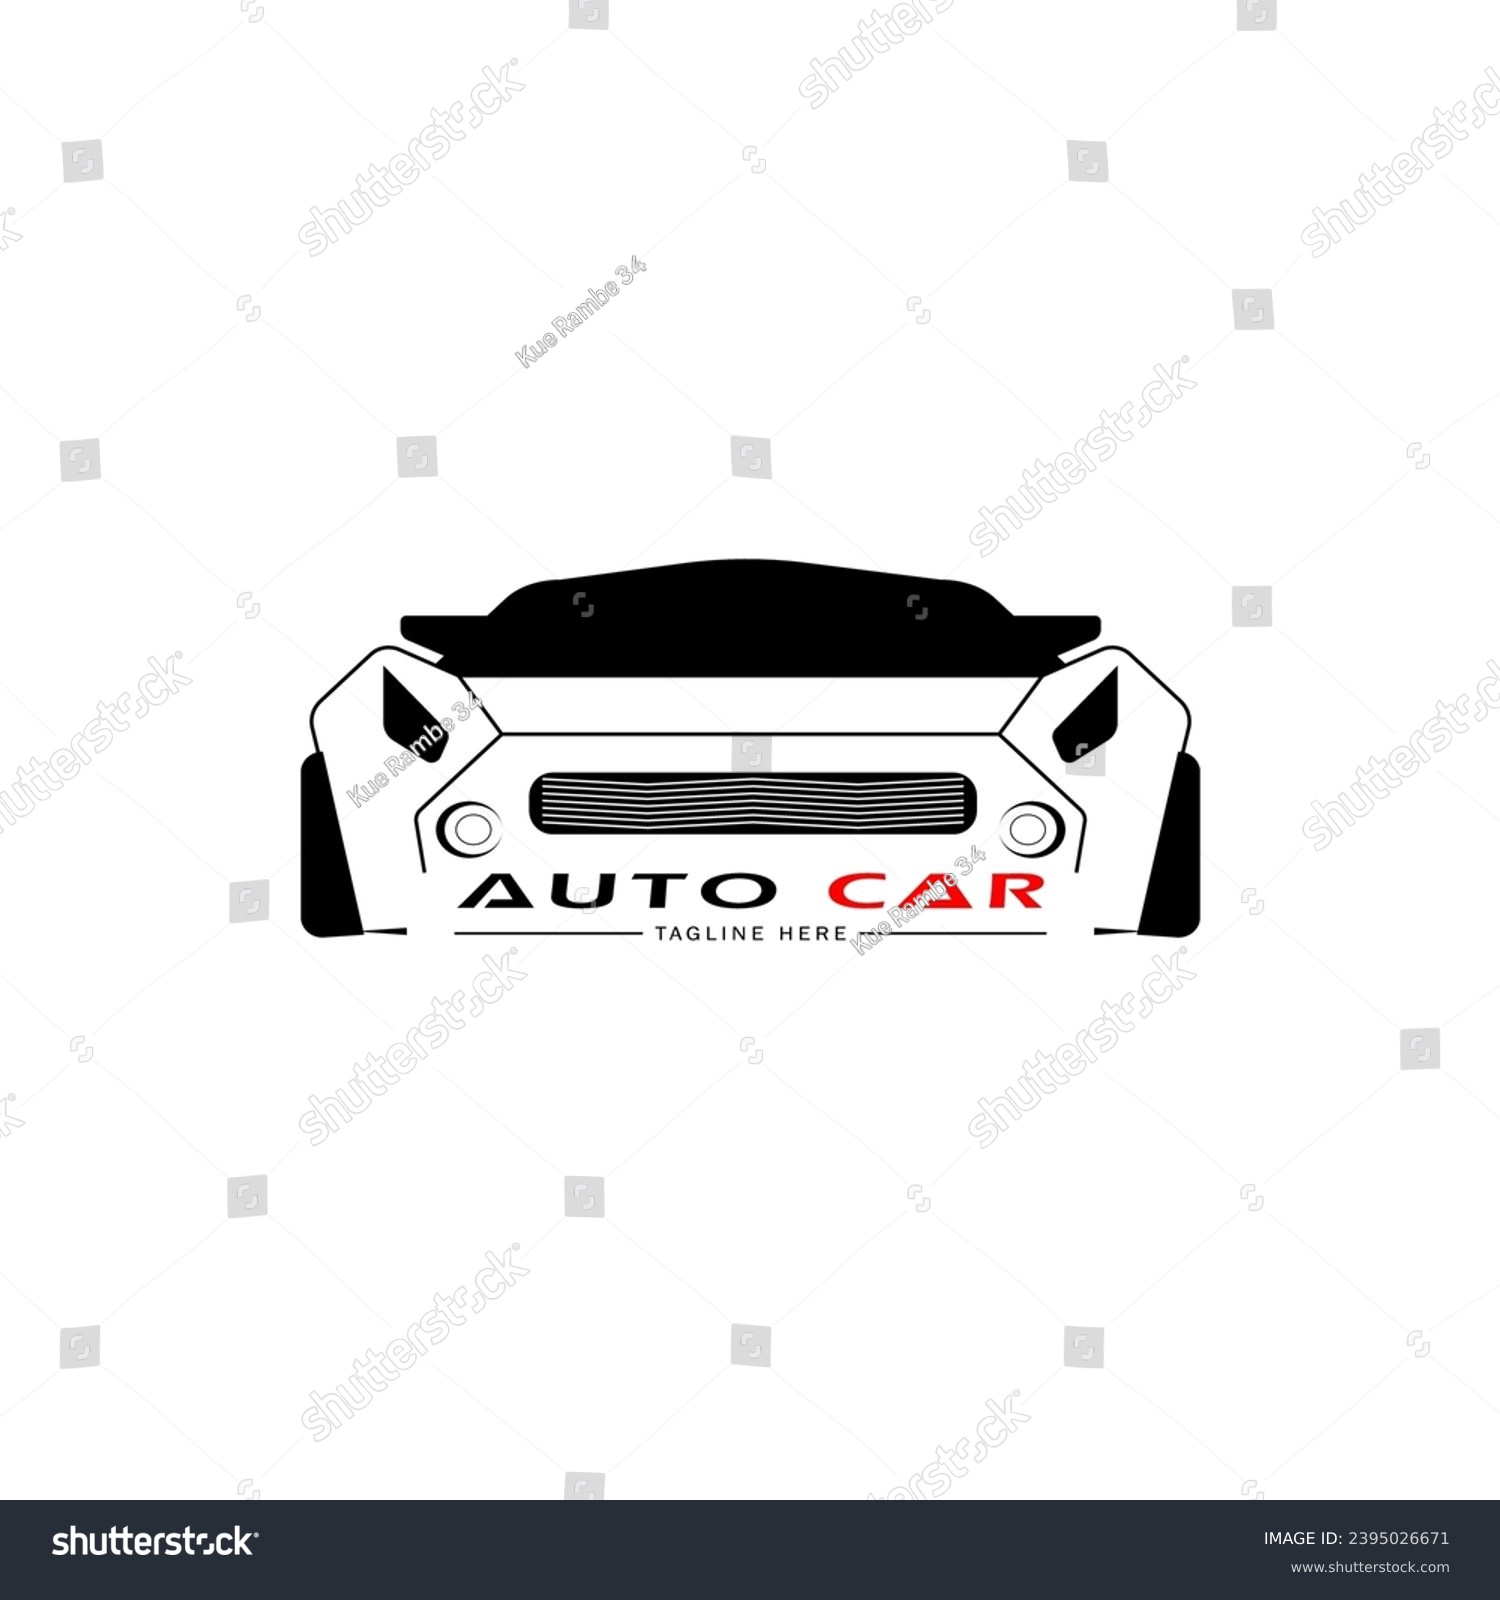 SVG of auto car logo spare parts and accessories for car logo details svg